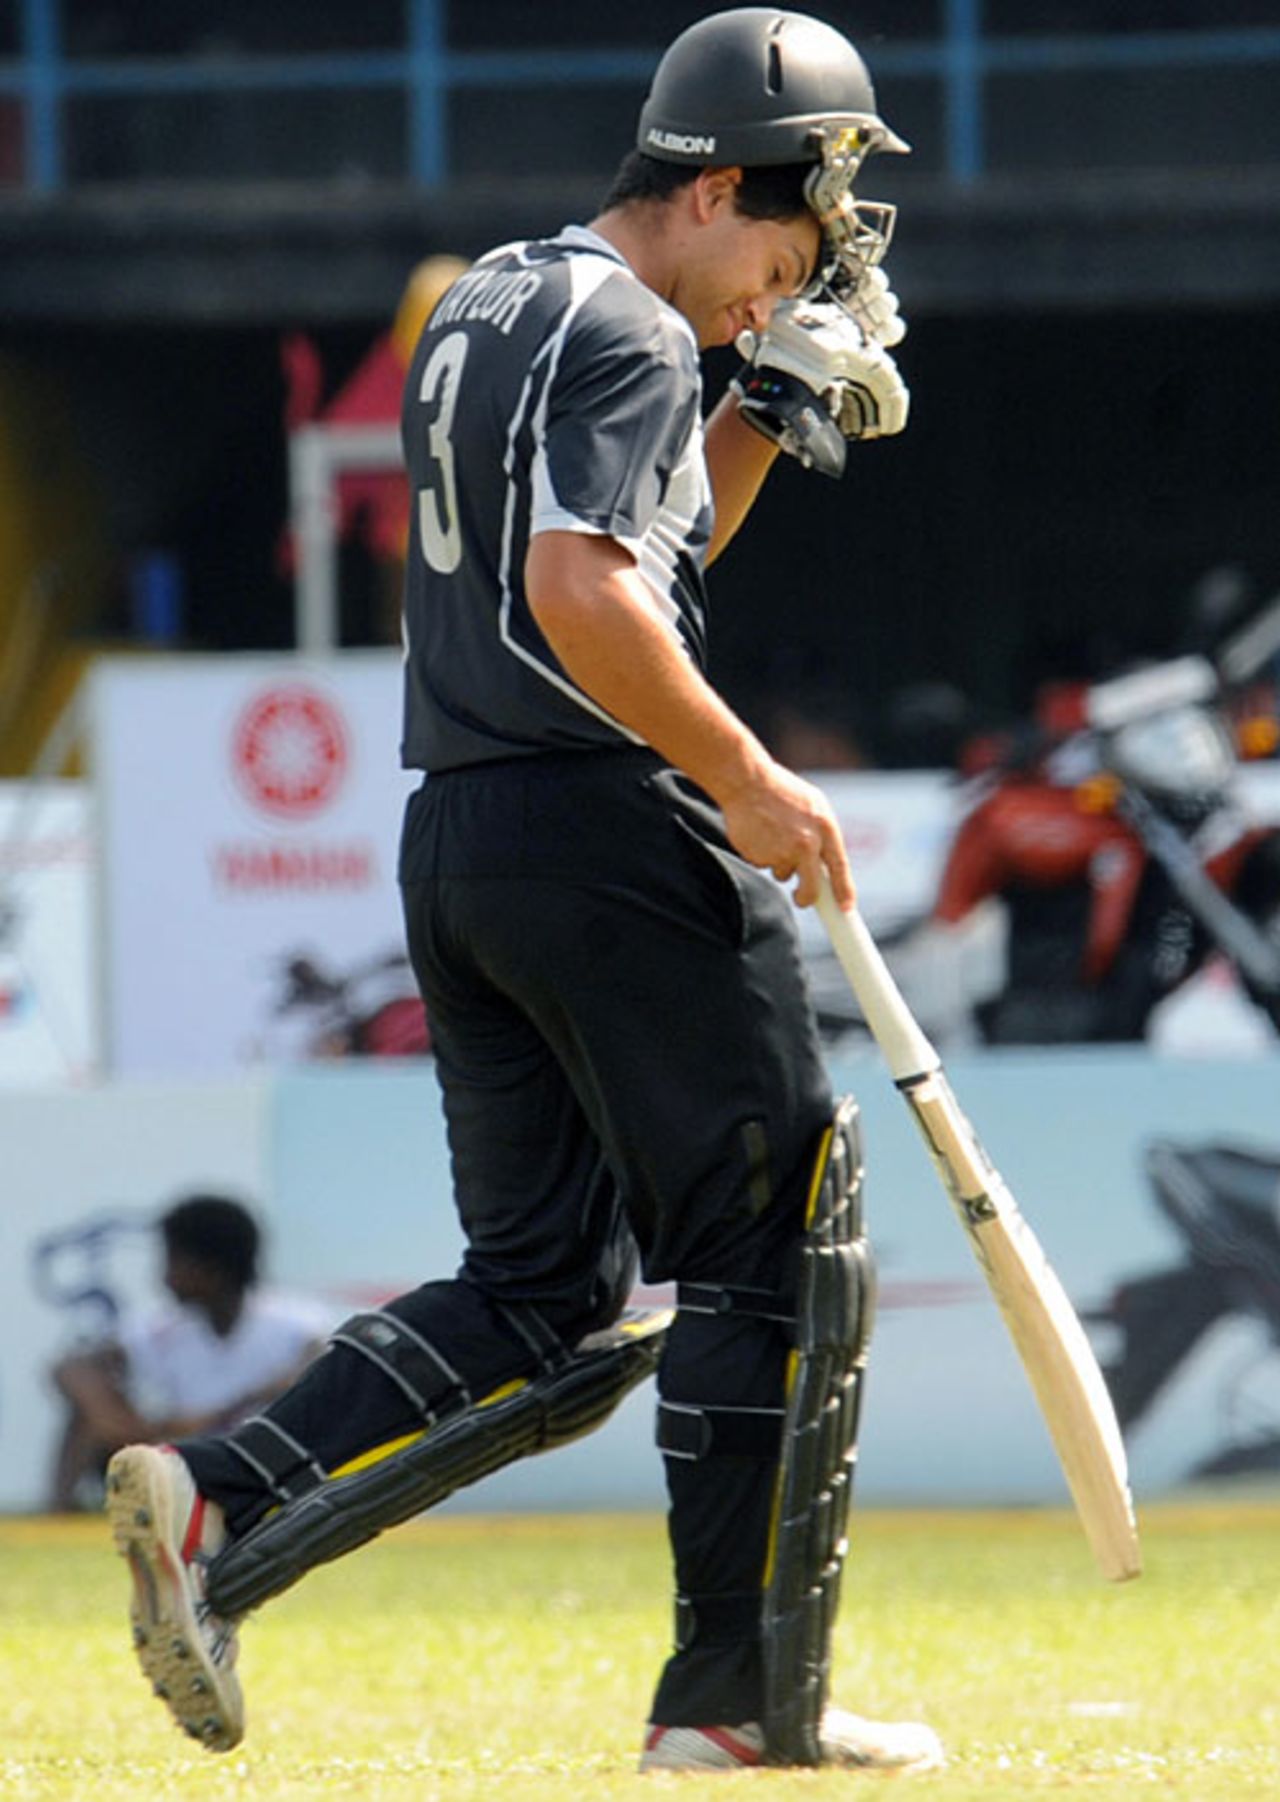 Ross Taylor walks back after being caught behind for 11, India v New Zealand, 2nd match, Compaq Cup, Colombo, September 11, 2009